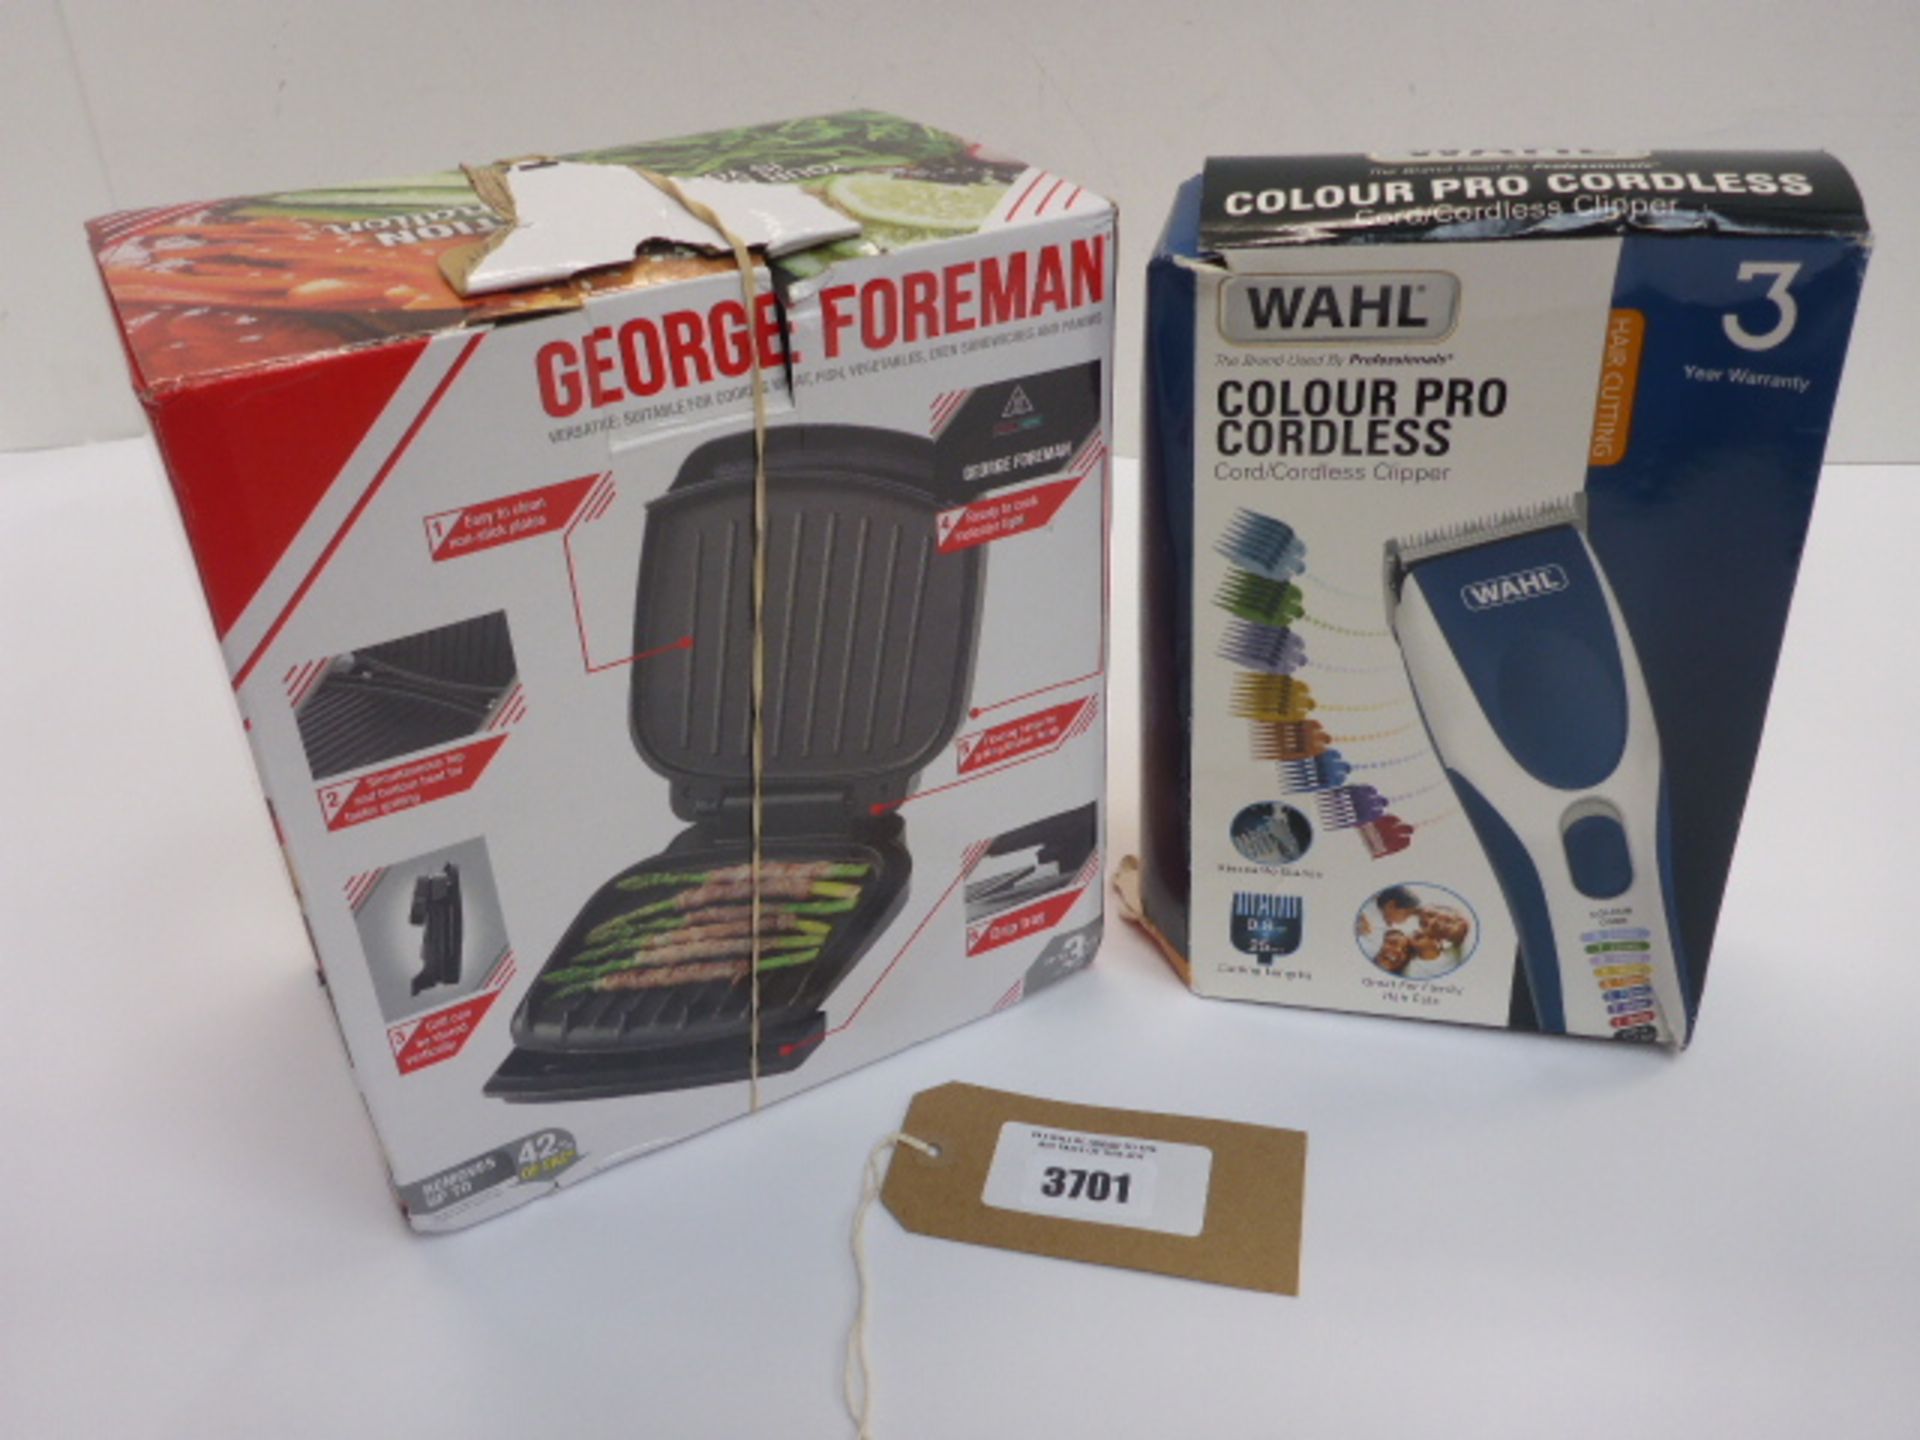 George Foreman grill and Wahl Colour pro cordless clipper set